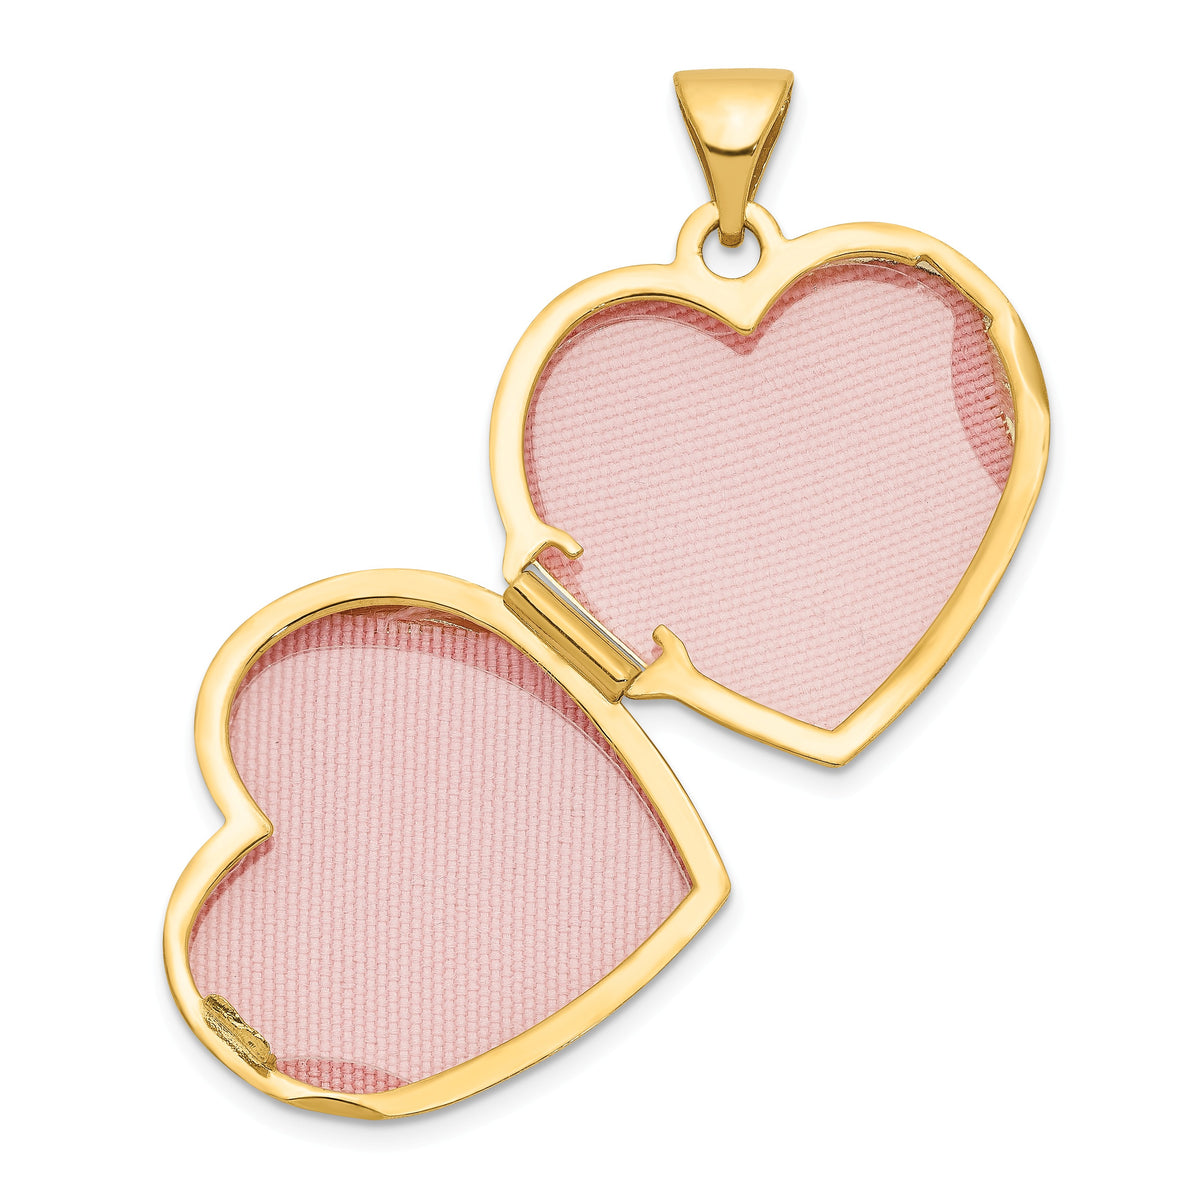 Alternate view of the 14k Yellow Gold 18mm Double Design Heart Shaped Locket by The Black Bow Jewelry Co.